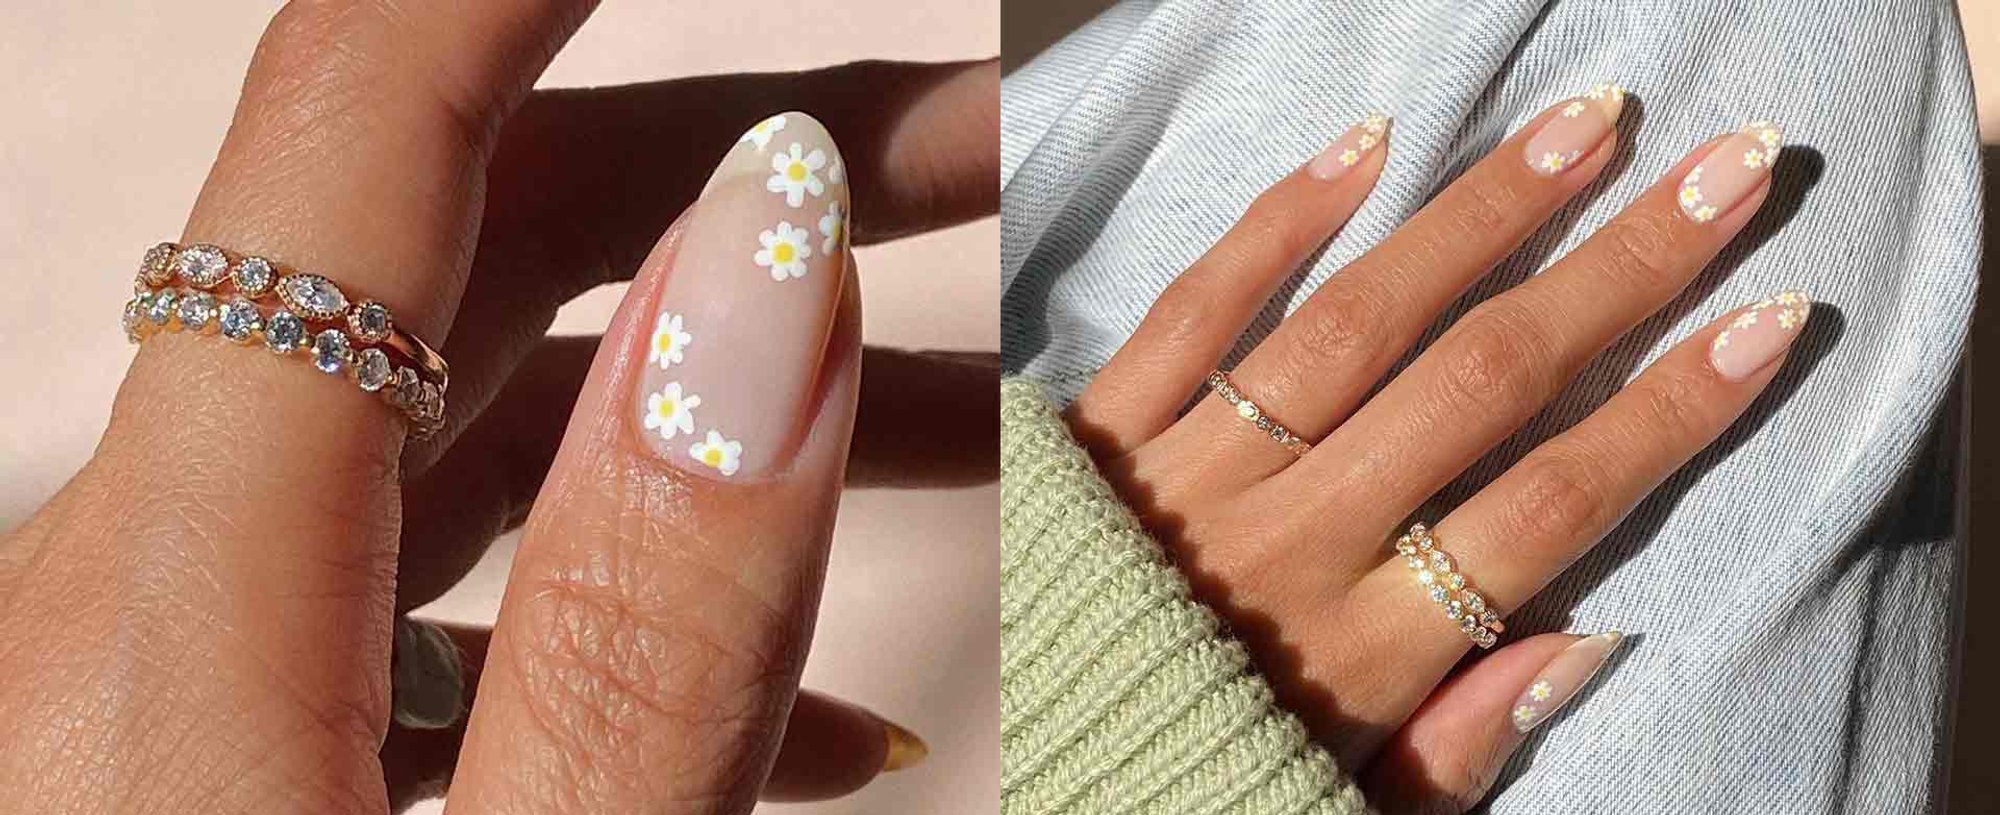 Soap Nails Are the Manicure Trend You Need To Know About Right Now